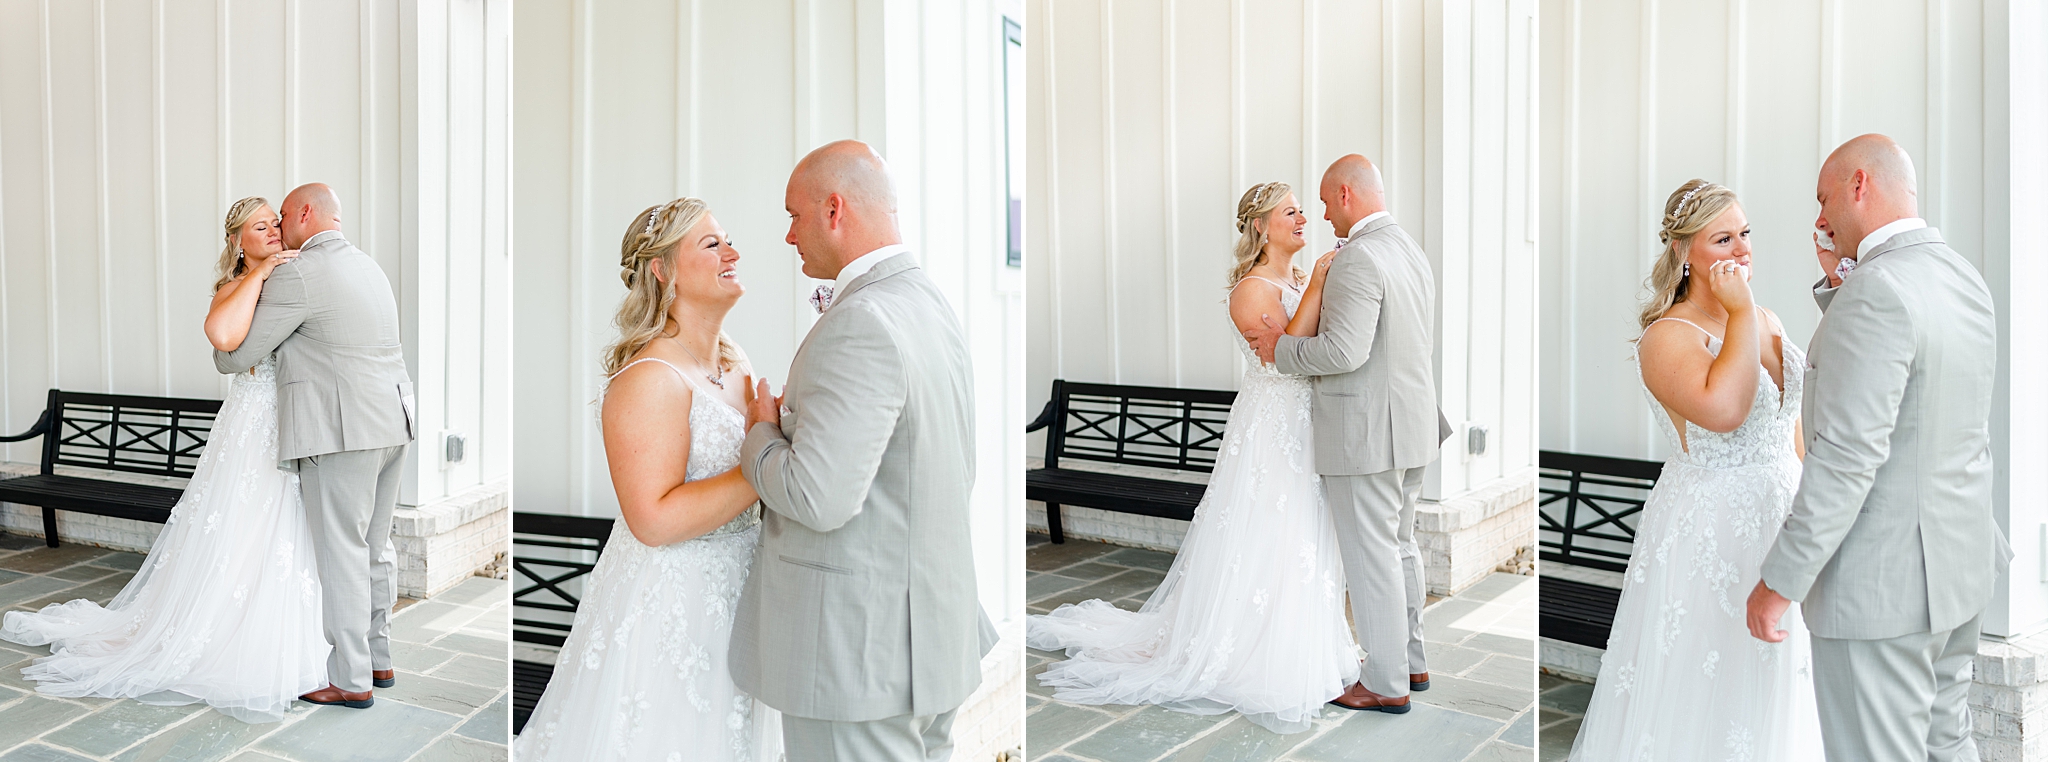 groom sees his bride for the first time before the ceremony